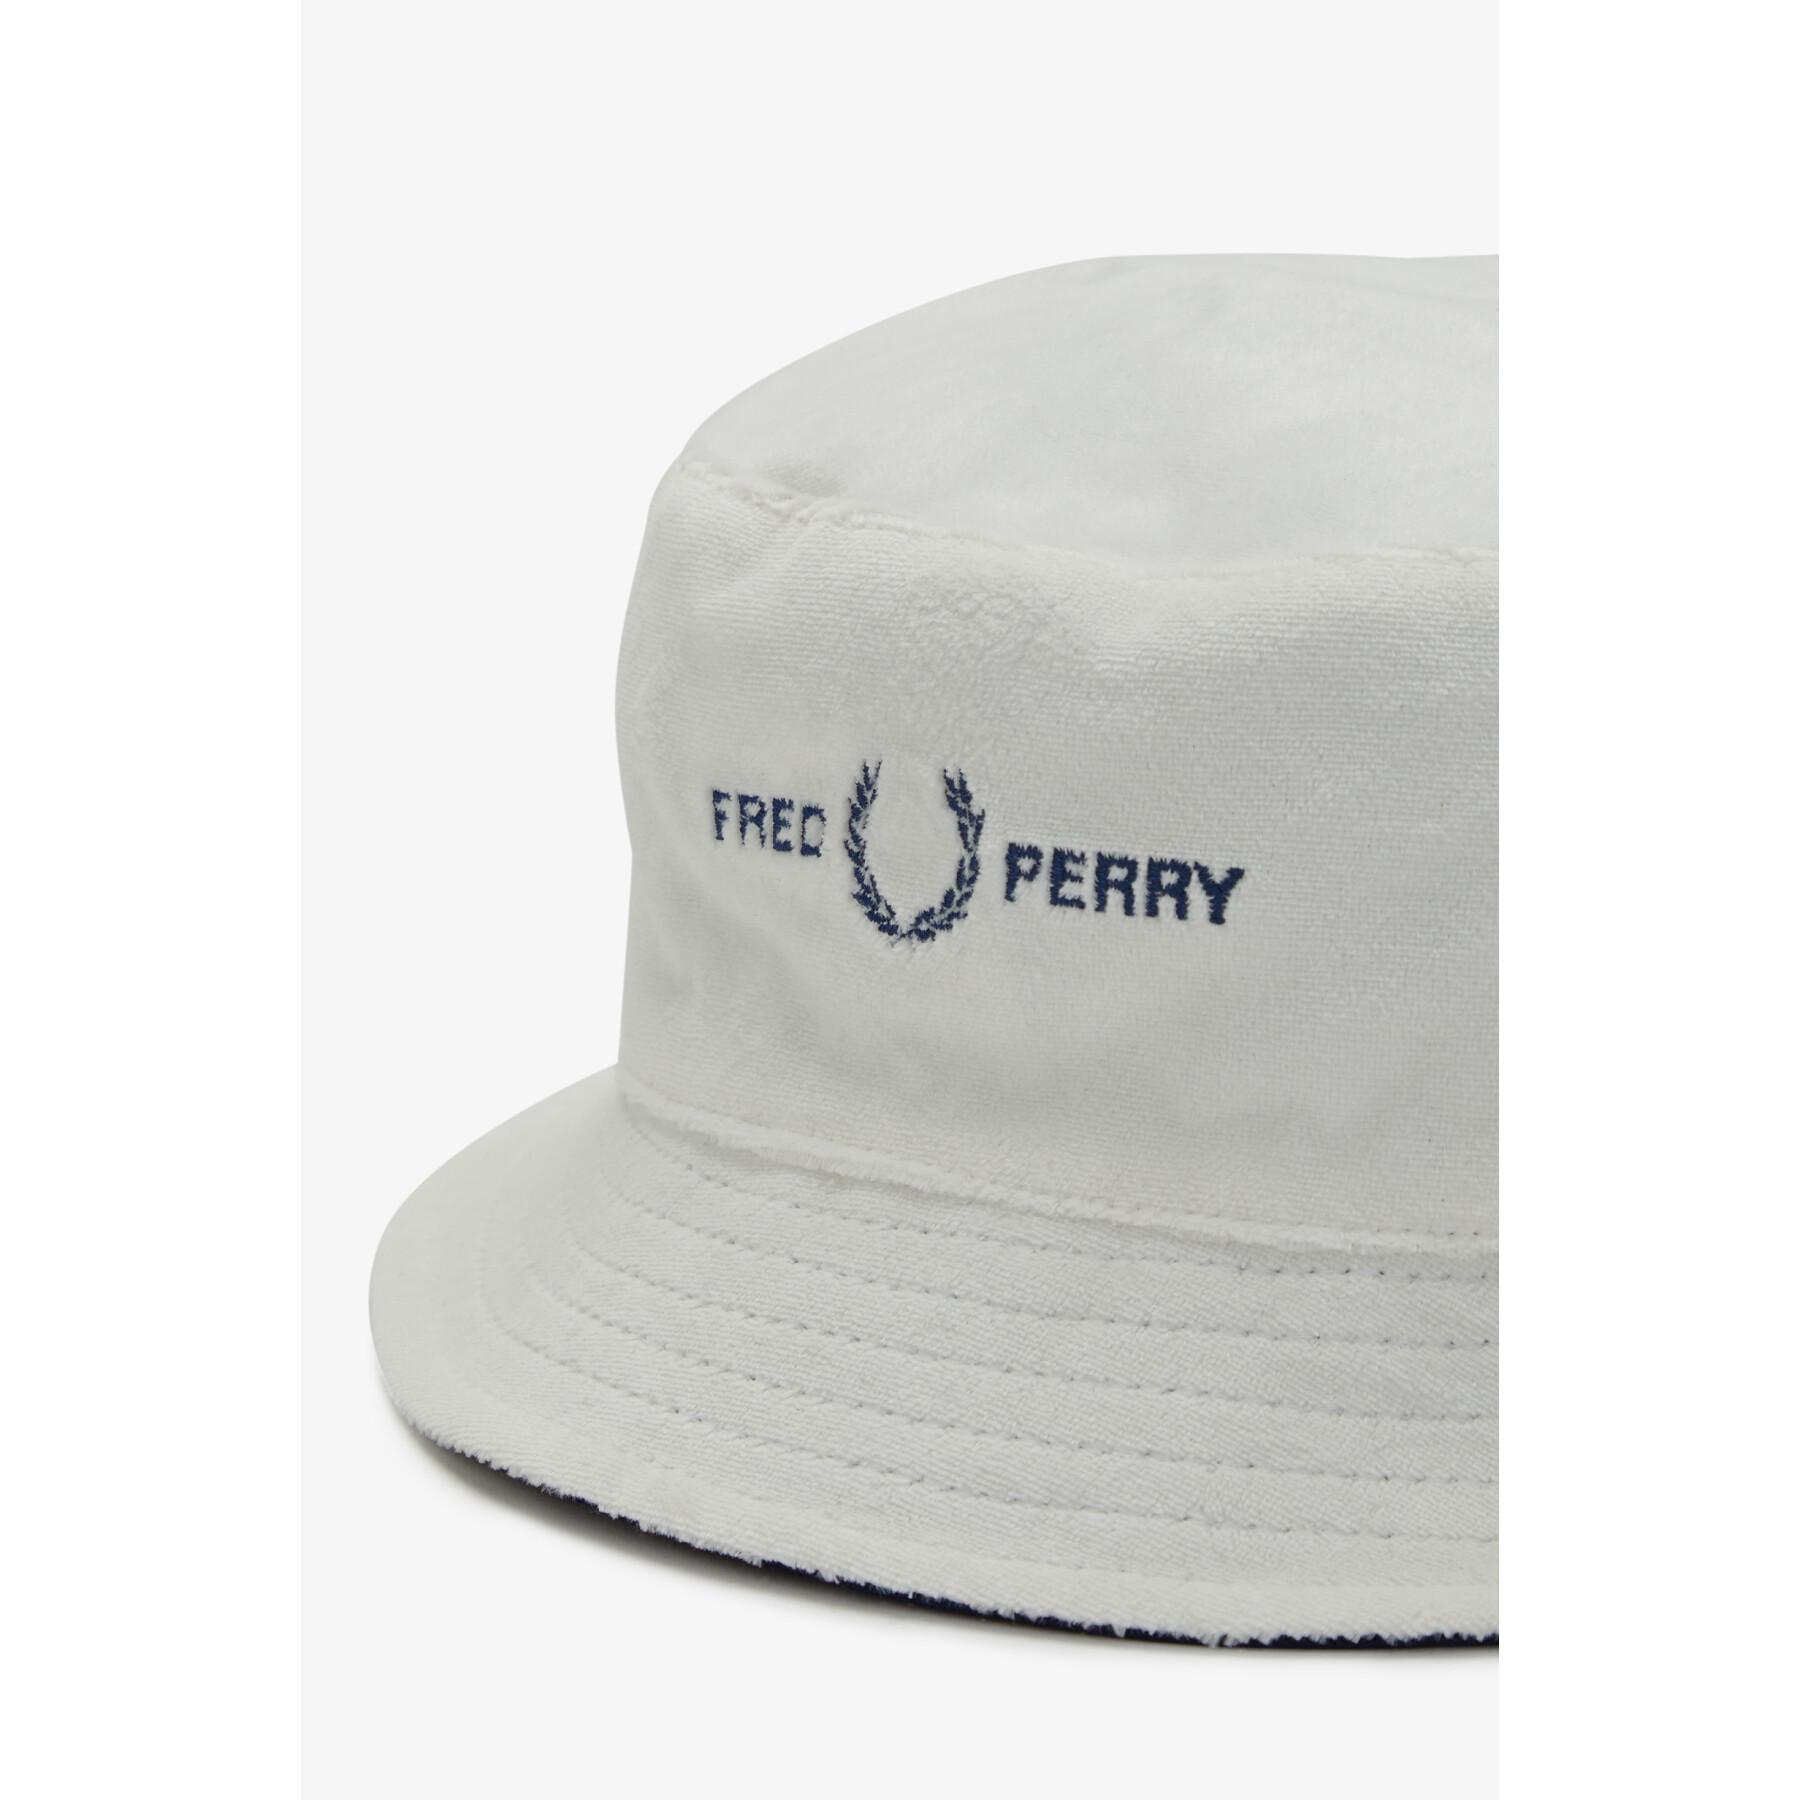 Bob Fred Perry